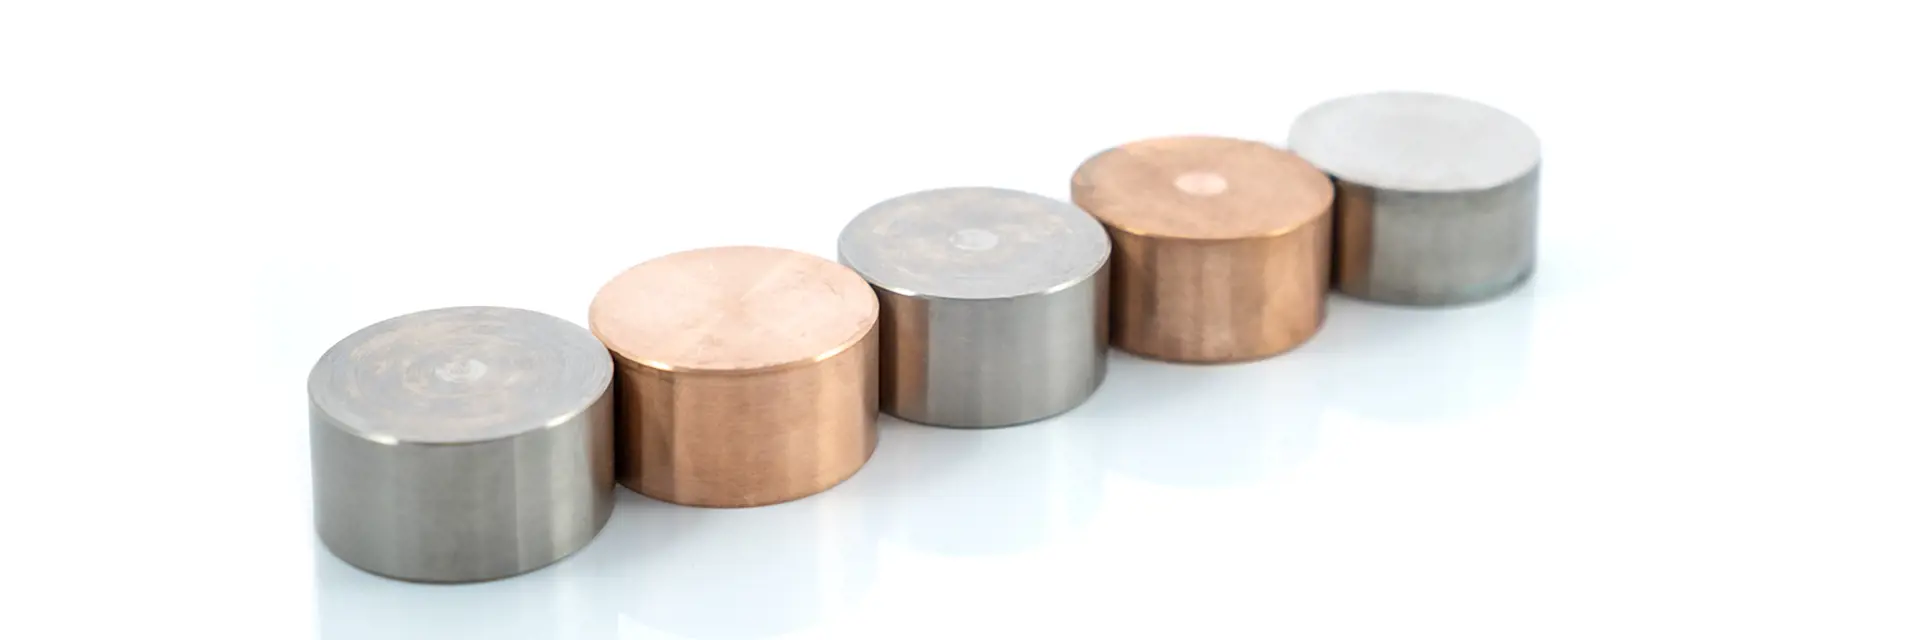 Iron and copper base metal samples from Brammer Standard